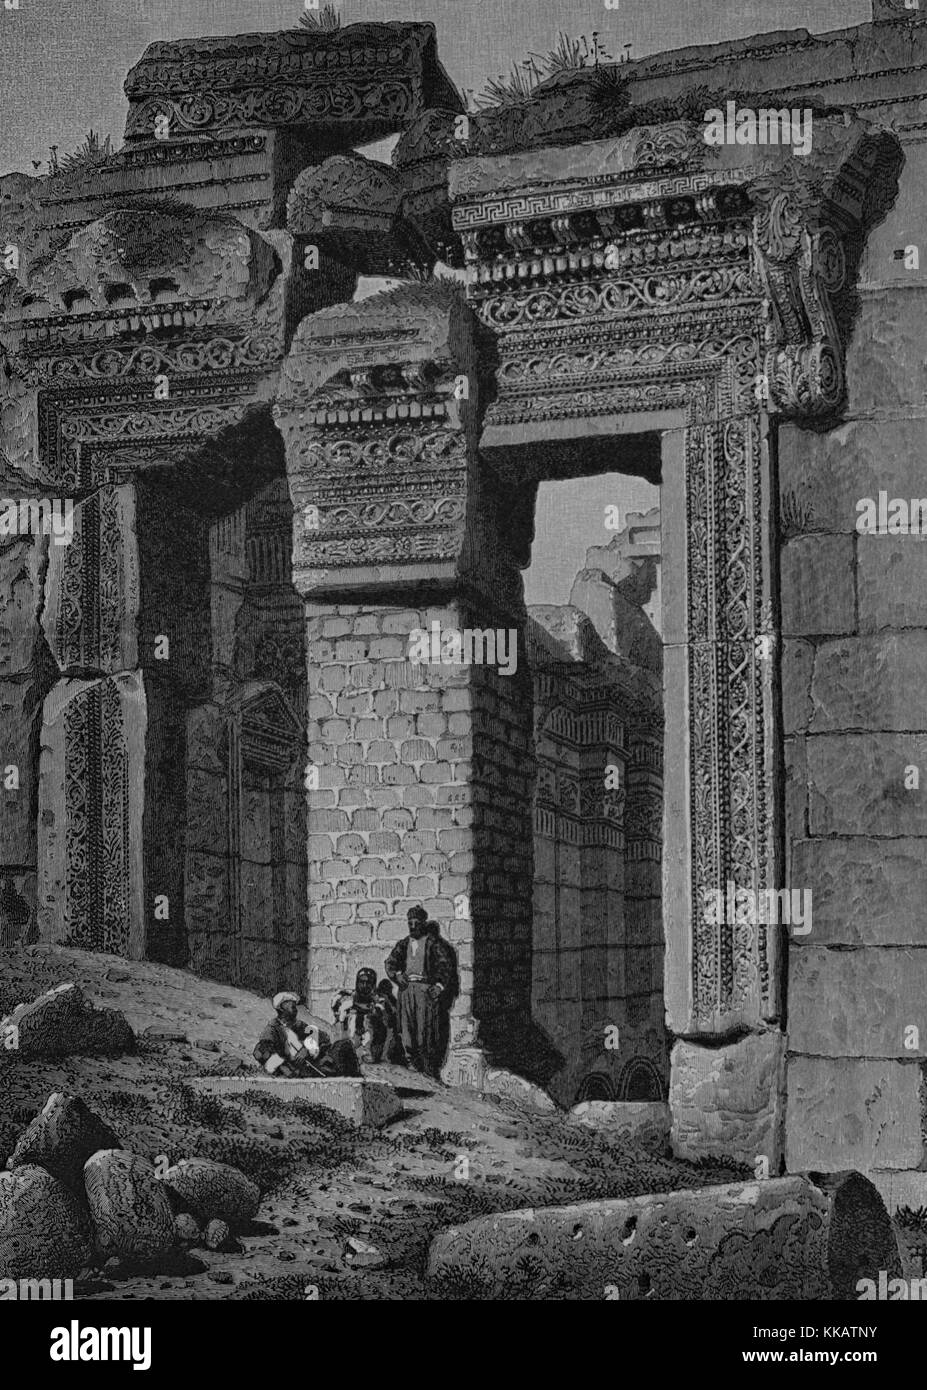 Wood engraving depicting a large stone entry, three men in front of it, captioned 'Gateway to the Temple of the Sun, Ba'albek, It is twenty-one feet in width, and forty-two feet high, The modern masonry, which supports the displaced keystone, conceals the crested eagle carved upon its soffit', from the book Picturesque Palestine, Sinai, and Egypt, by Sir Charles William Wilson, 1882. From the New York Public Library. Stock Photo